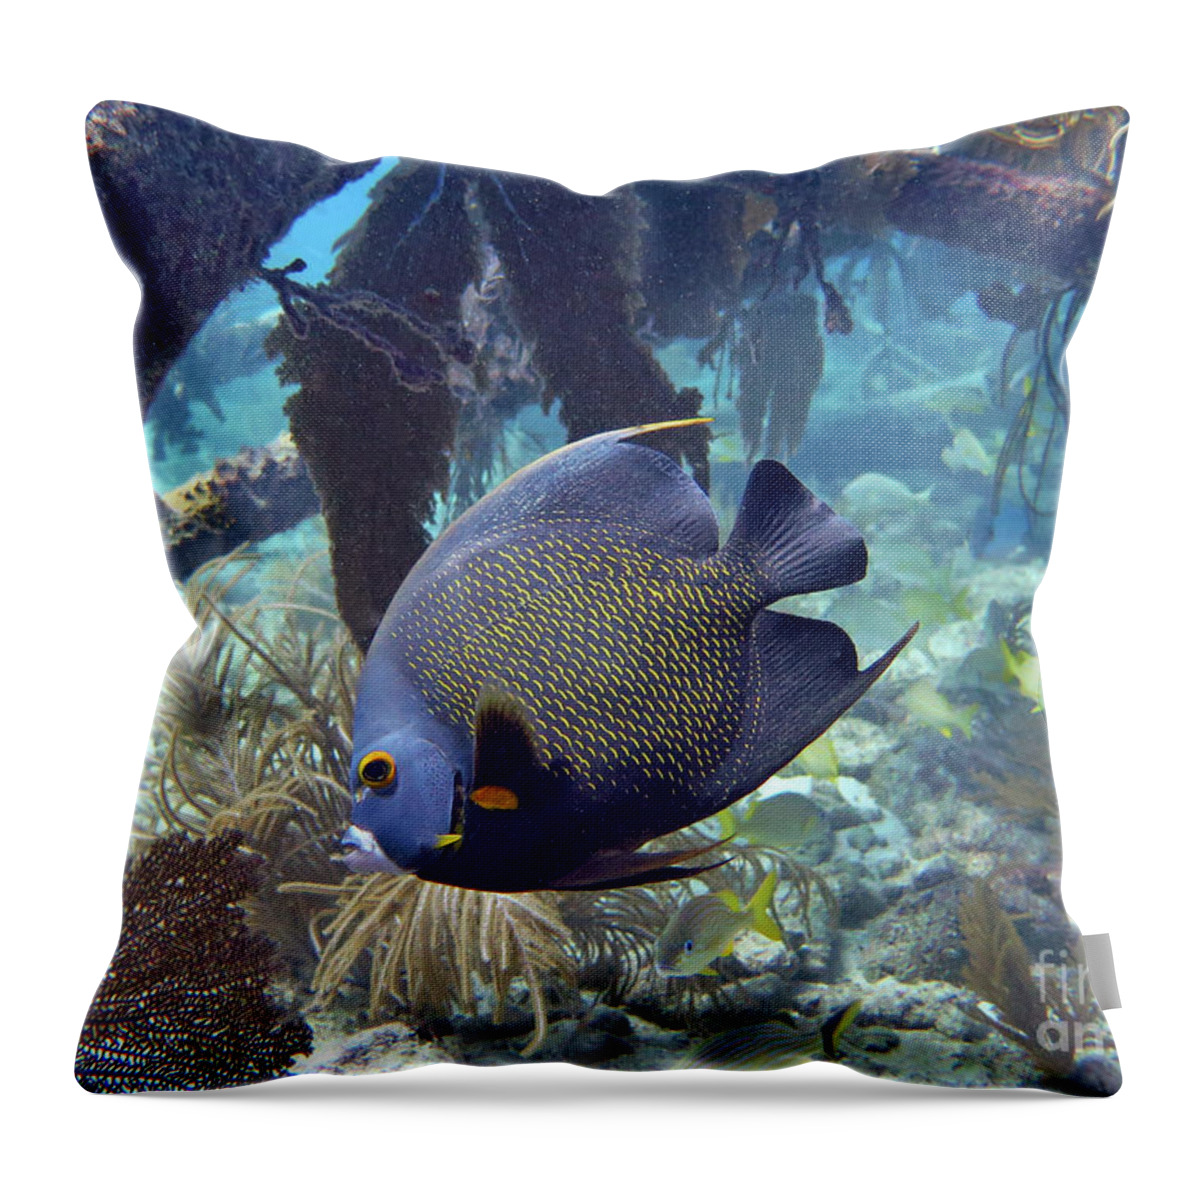 Underwater Throw Pillow featuring the photograph French Angelfish 2 by Daryl Duda